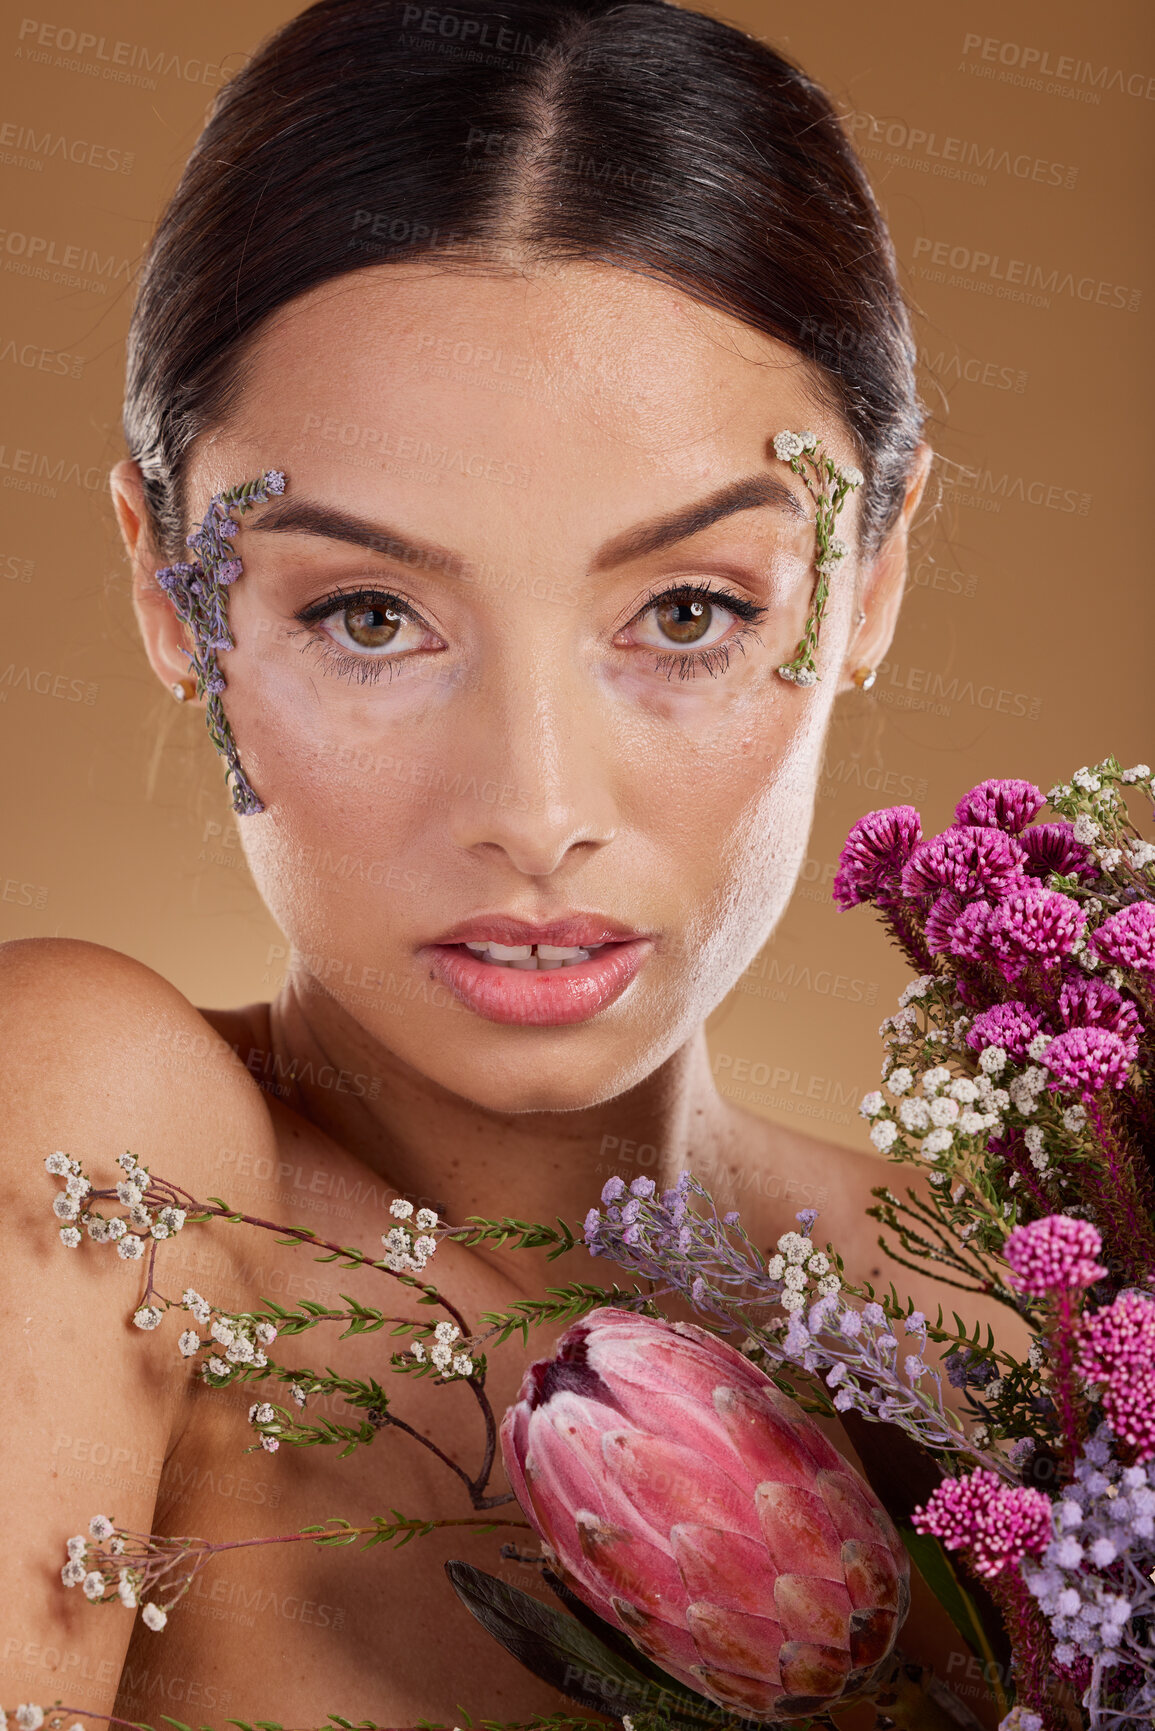 Buy stock photo Floral beauty, flower bouquet and portrait of woman with eco friendly cosmetics, natural facial product or lavender skincare. Dermatology, spa salon and aesthetic model face with sustainable makeup